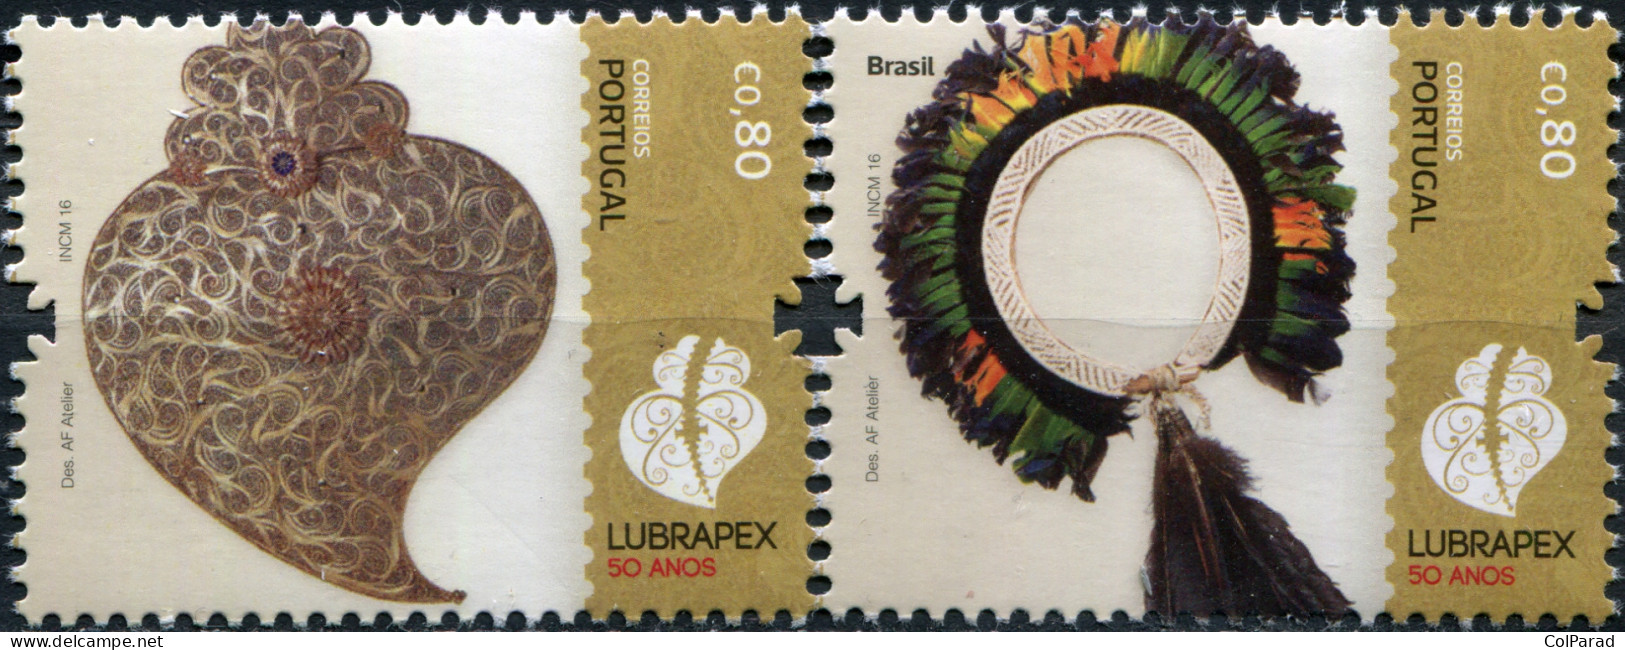 PORTUGAL - 2016 - SET OF 2 STAMPS MNH ** - 50th Anniversary Of LUBRAPEX - Unused Stamps